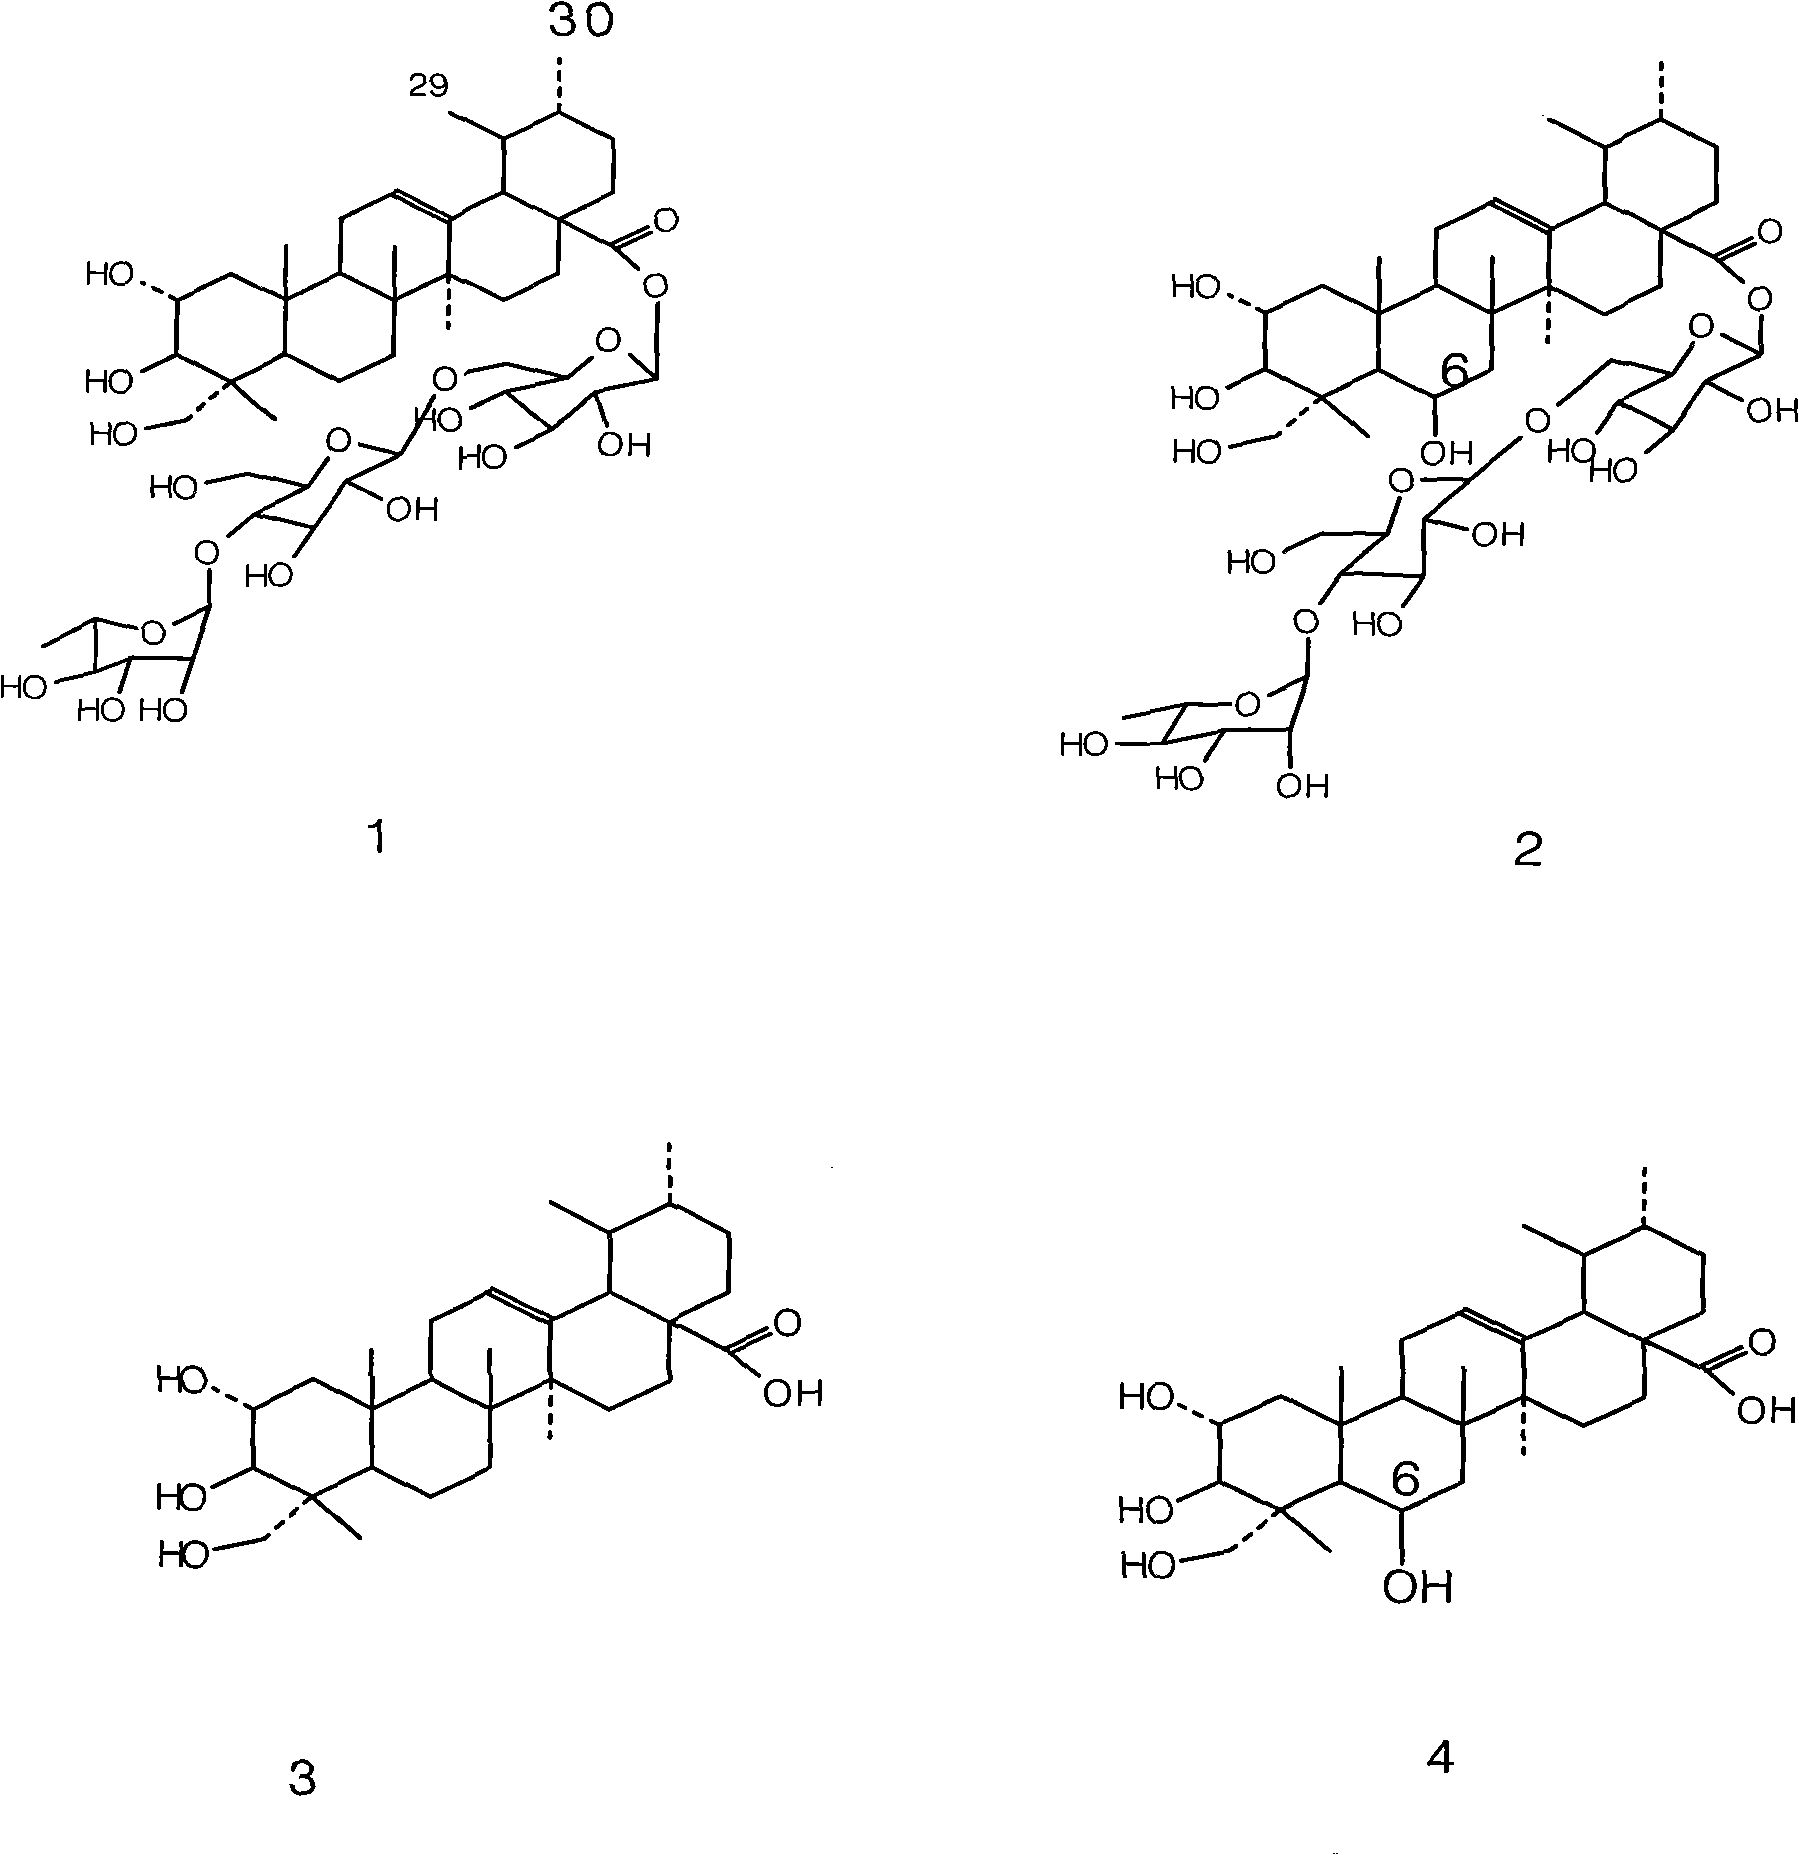 Method for preparing total asiatic acid, asiatic acid and madecassic acid from asiatic pennywort herb and use of prepared product